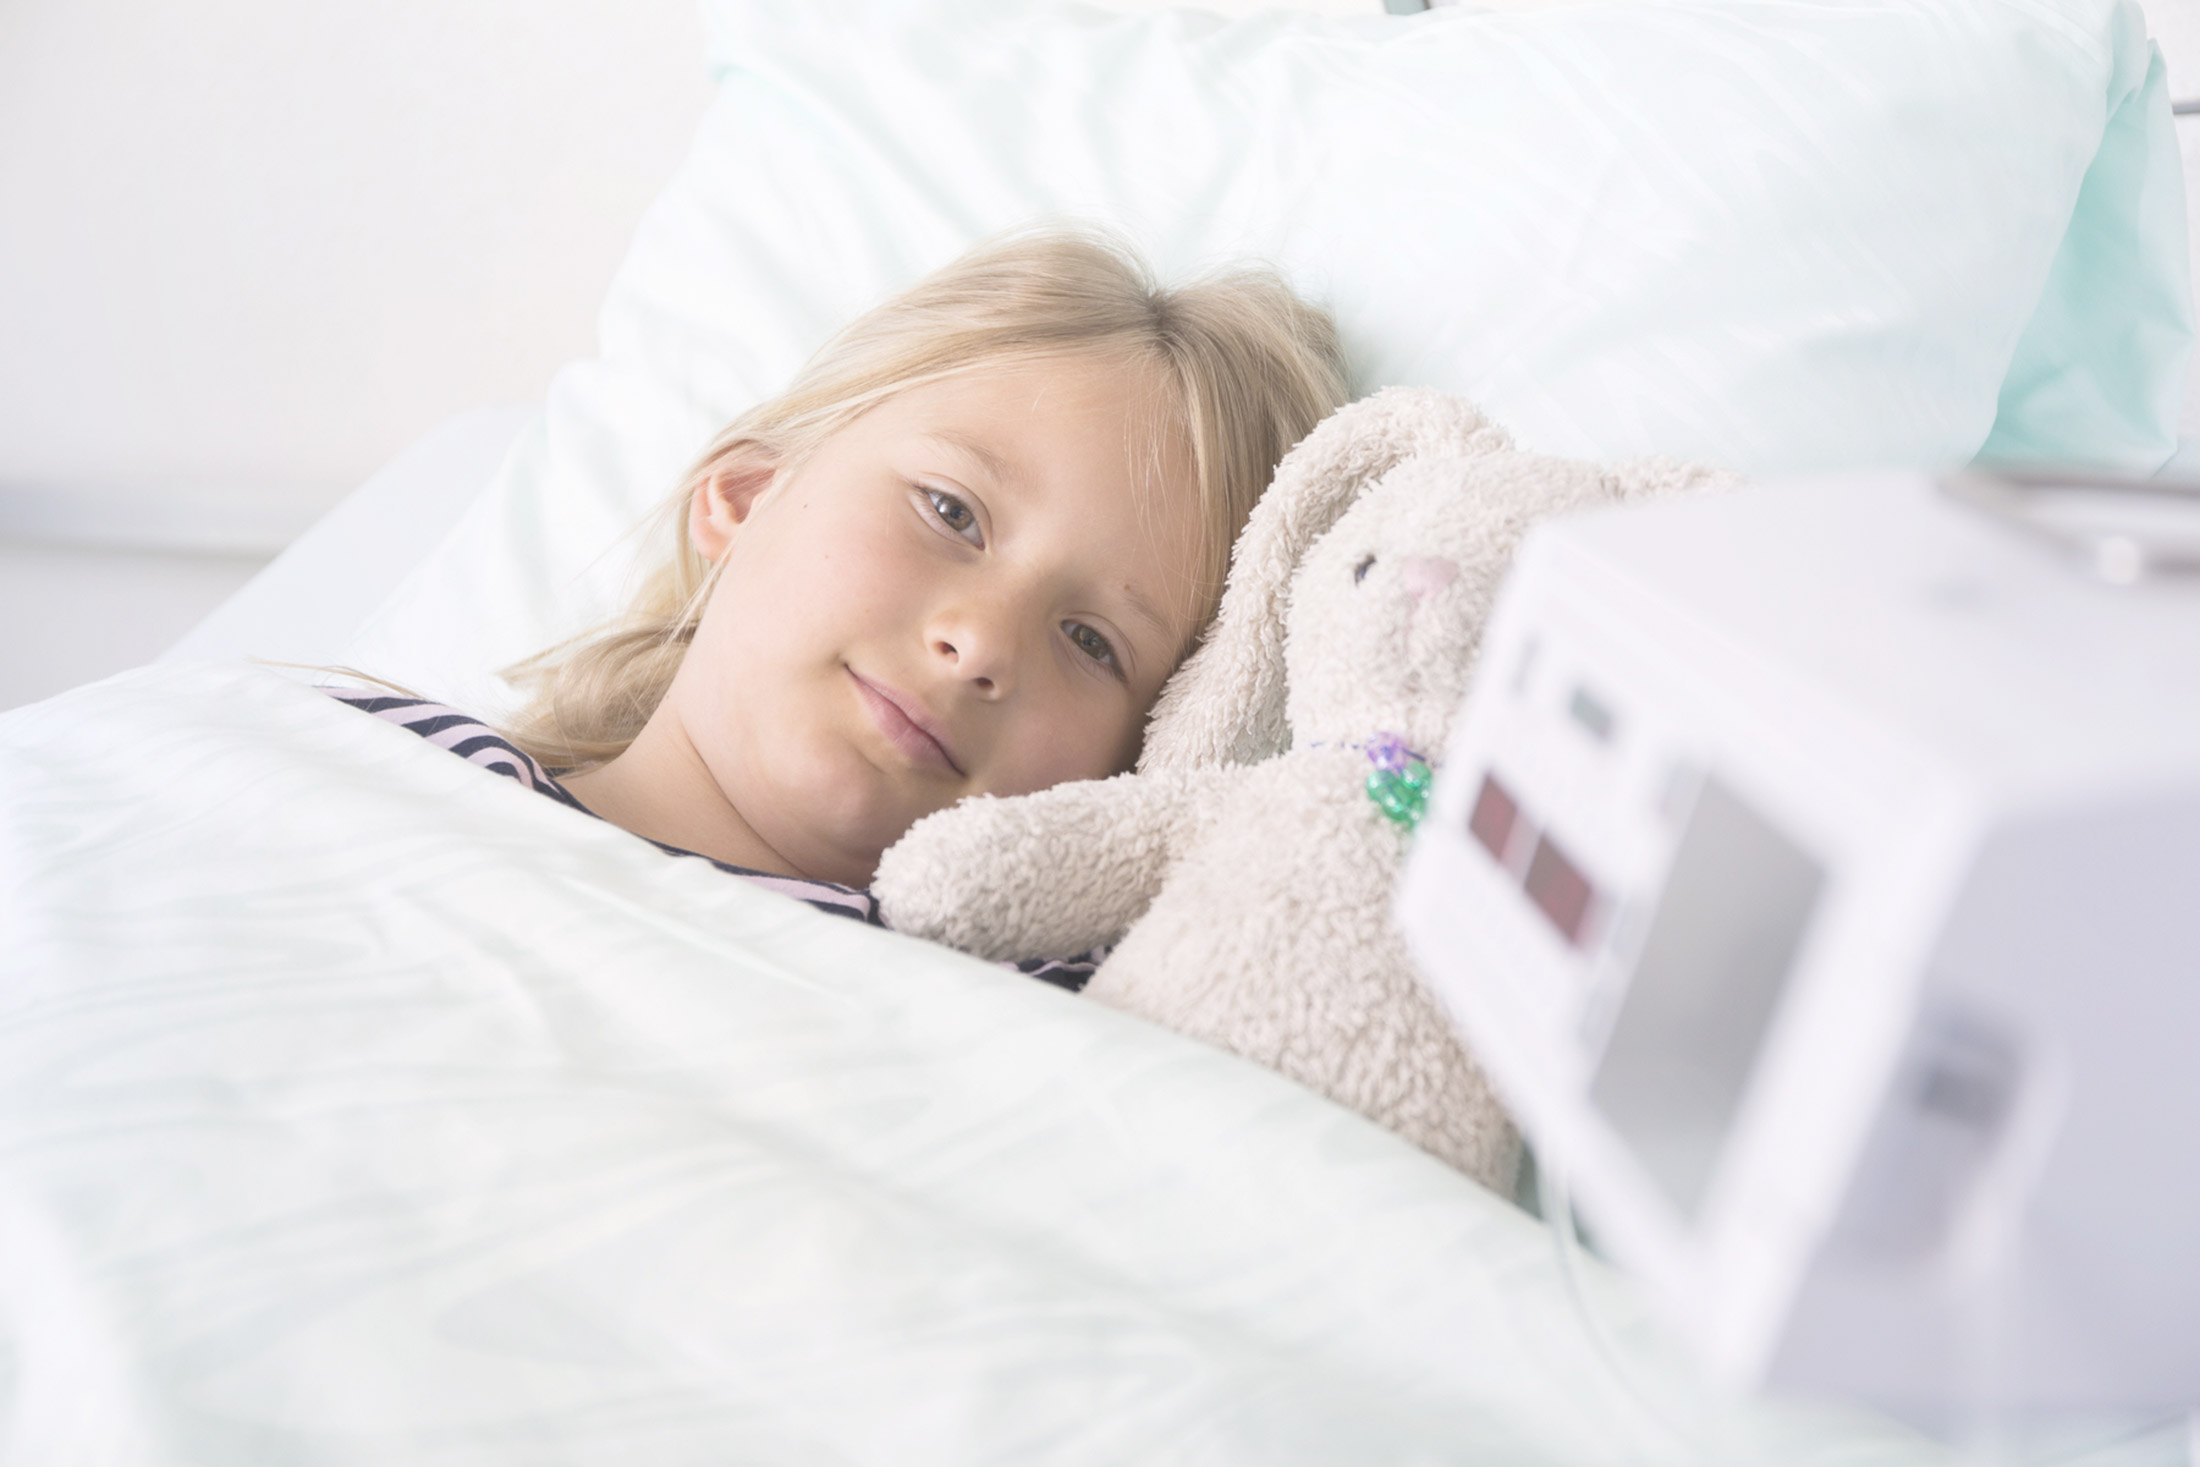 Child with cuddly toy from an infusion pump.